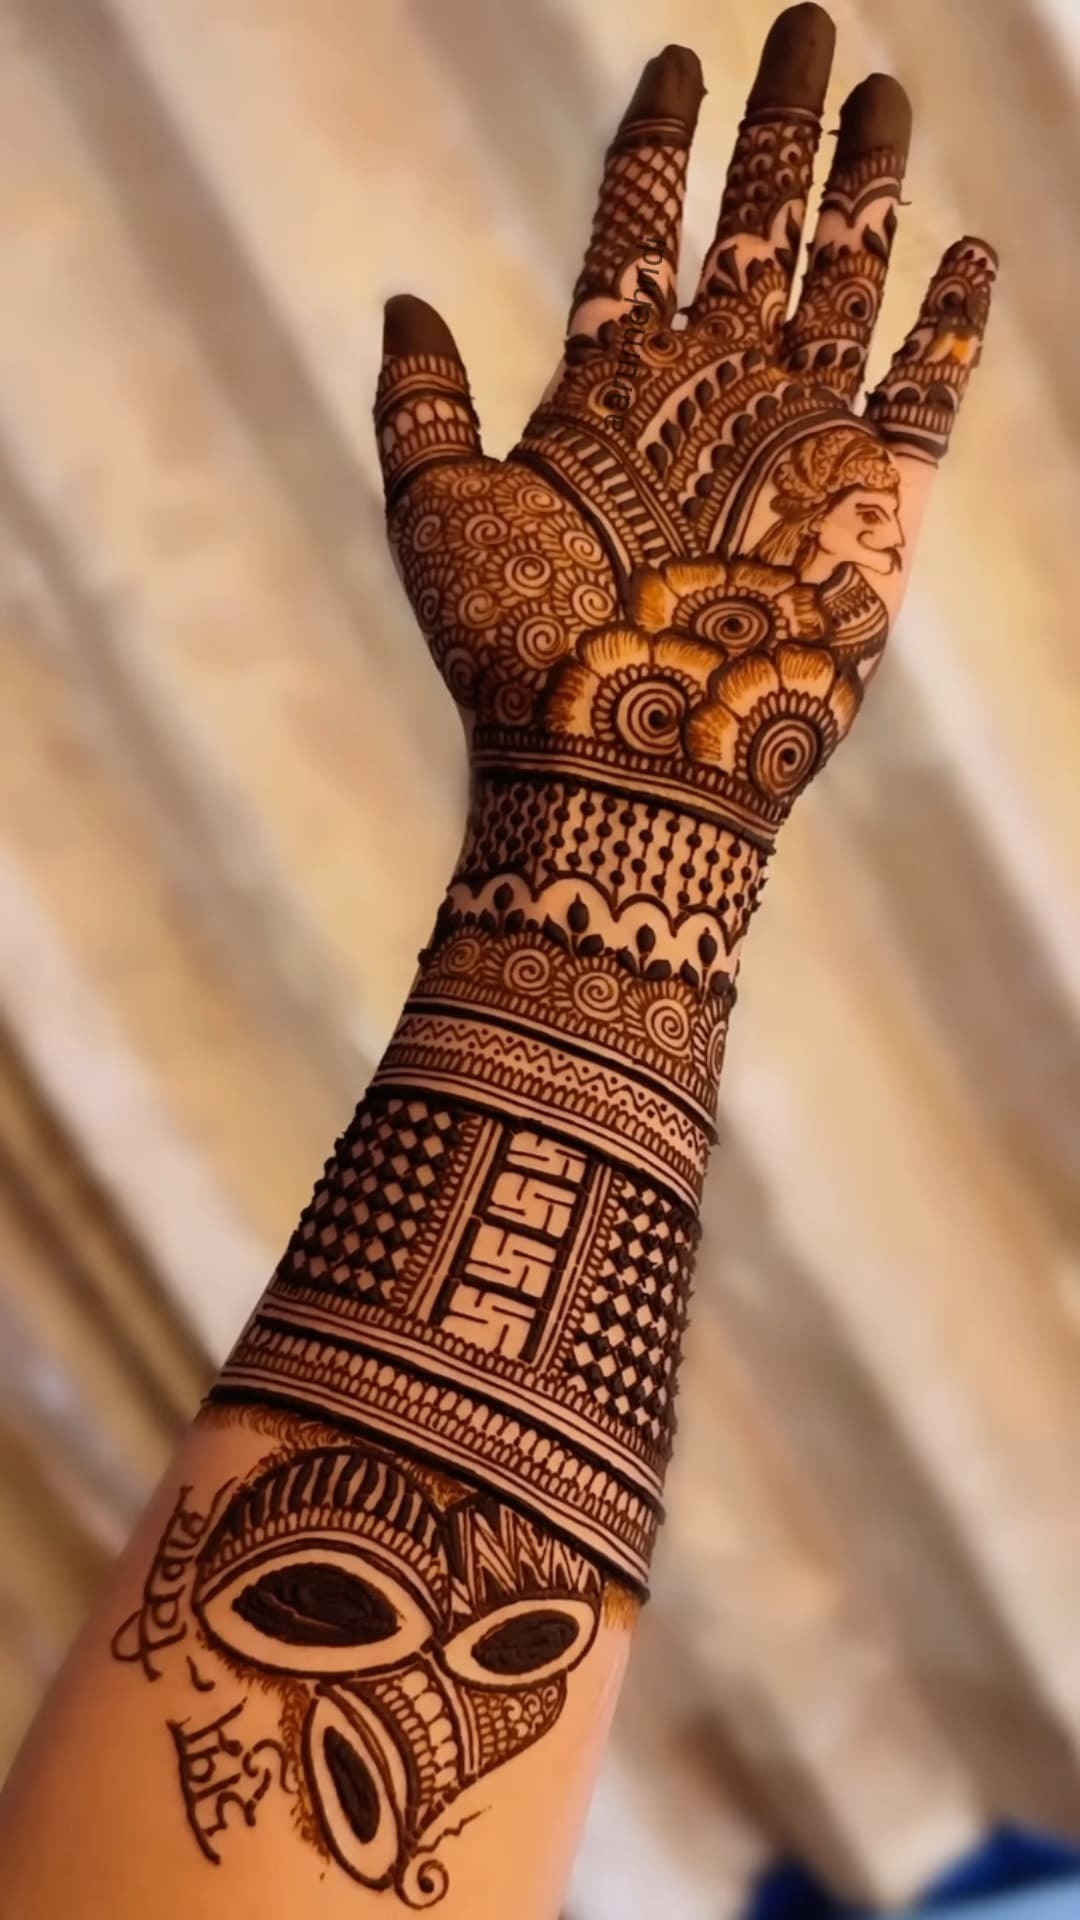 Indian Mehndi Designs Best Collection for Every Occasion